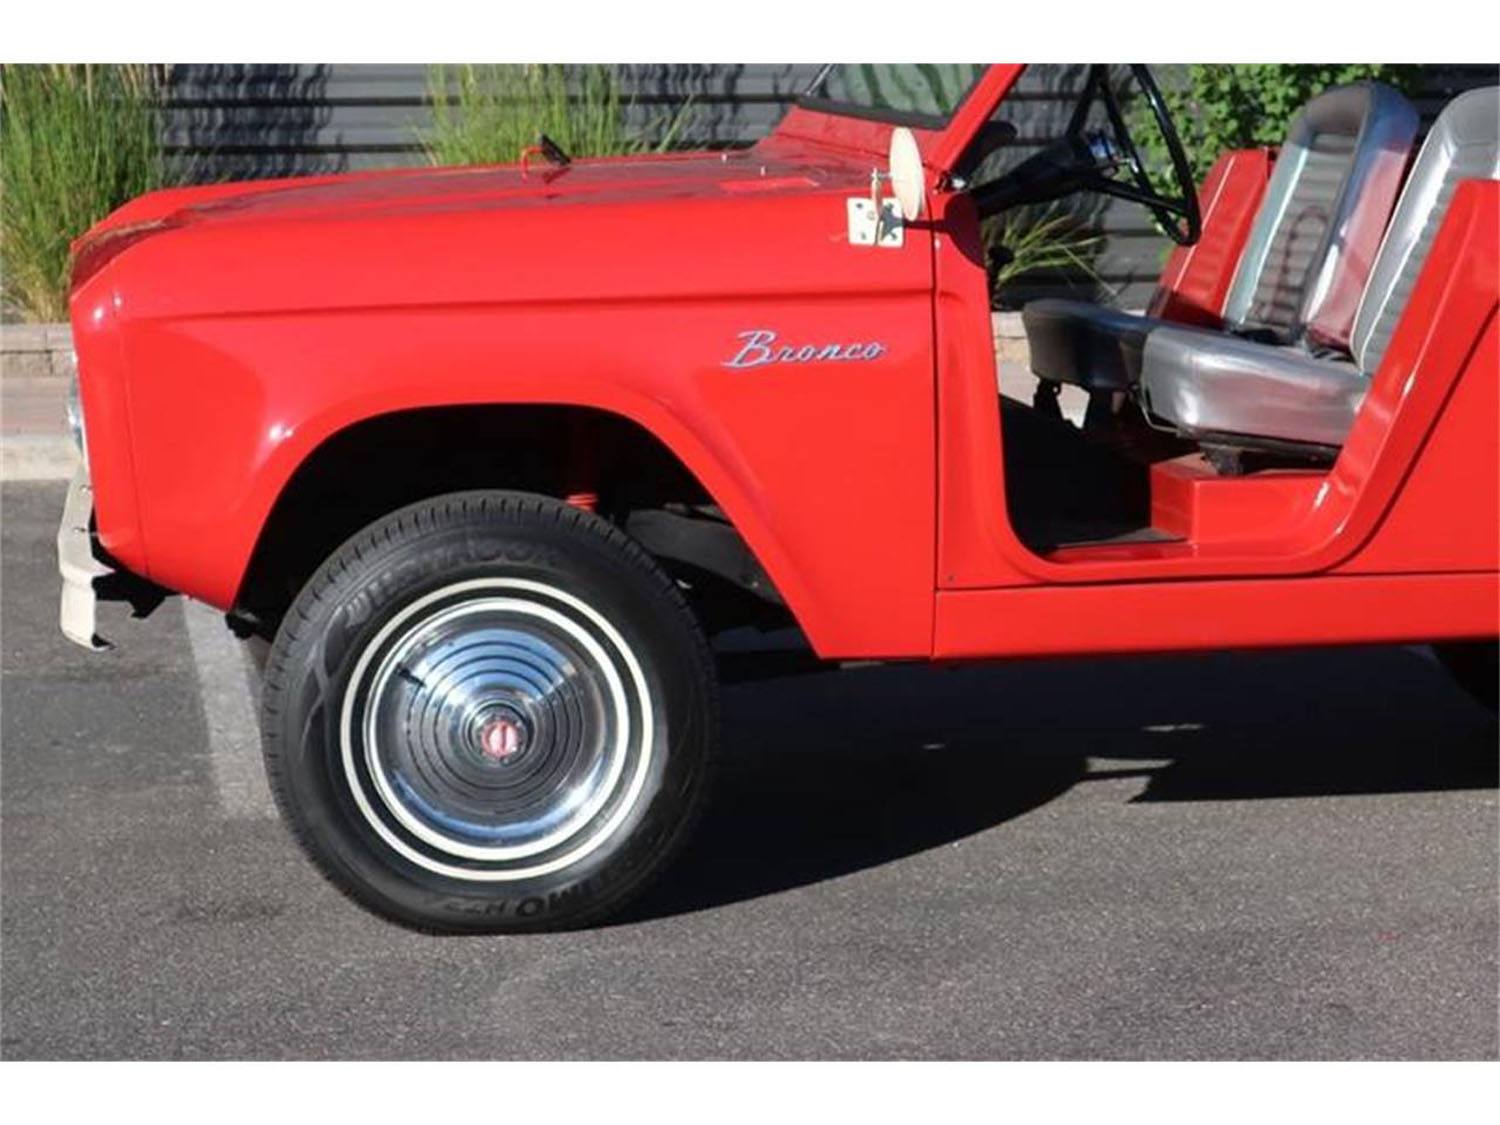 1966 Ford Bronco U13 Roadster Is Perfectly Restored